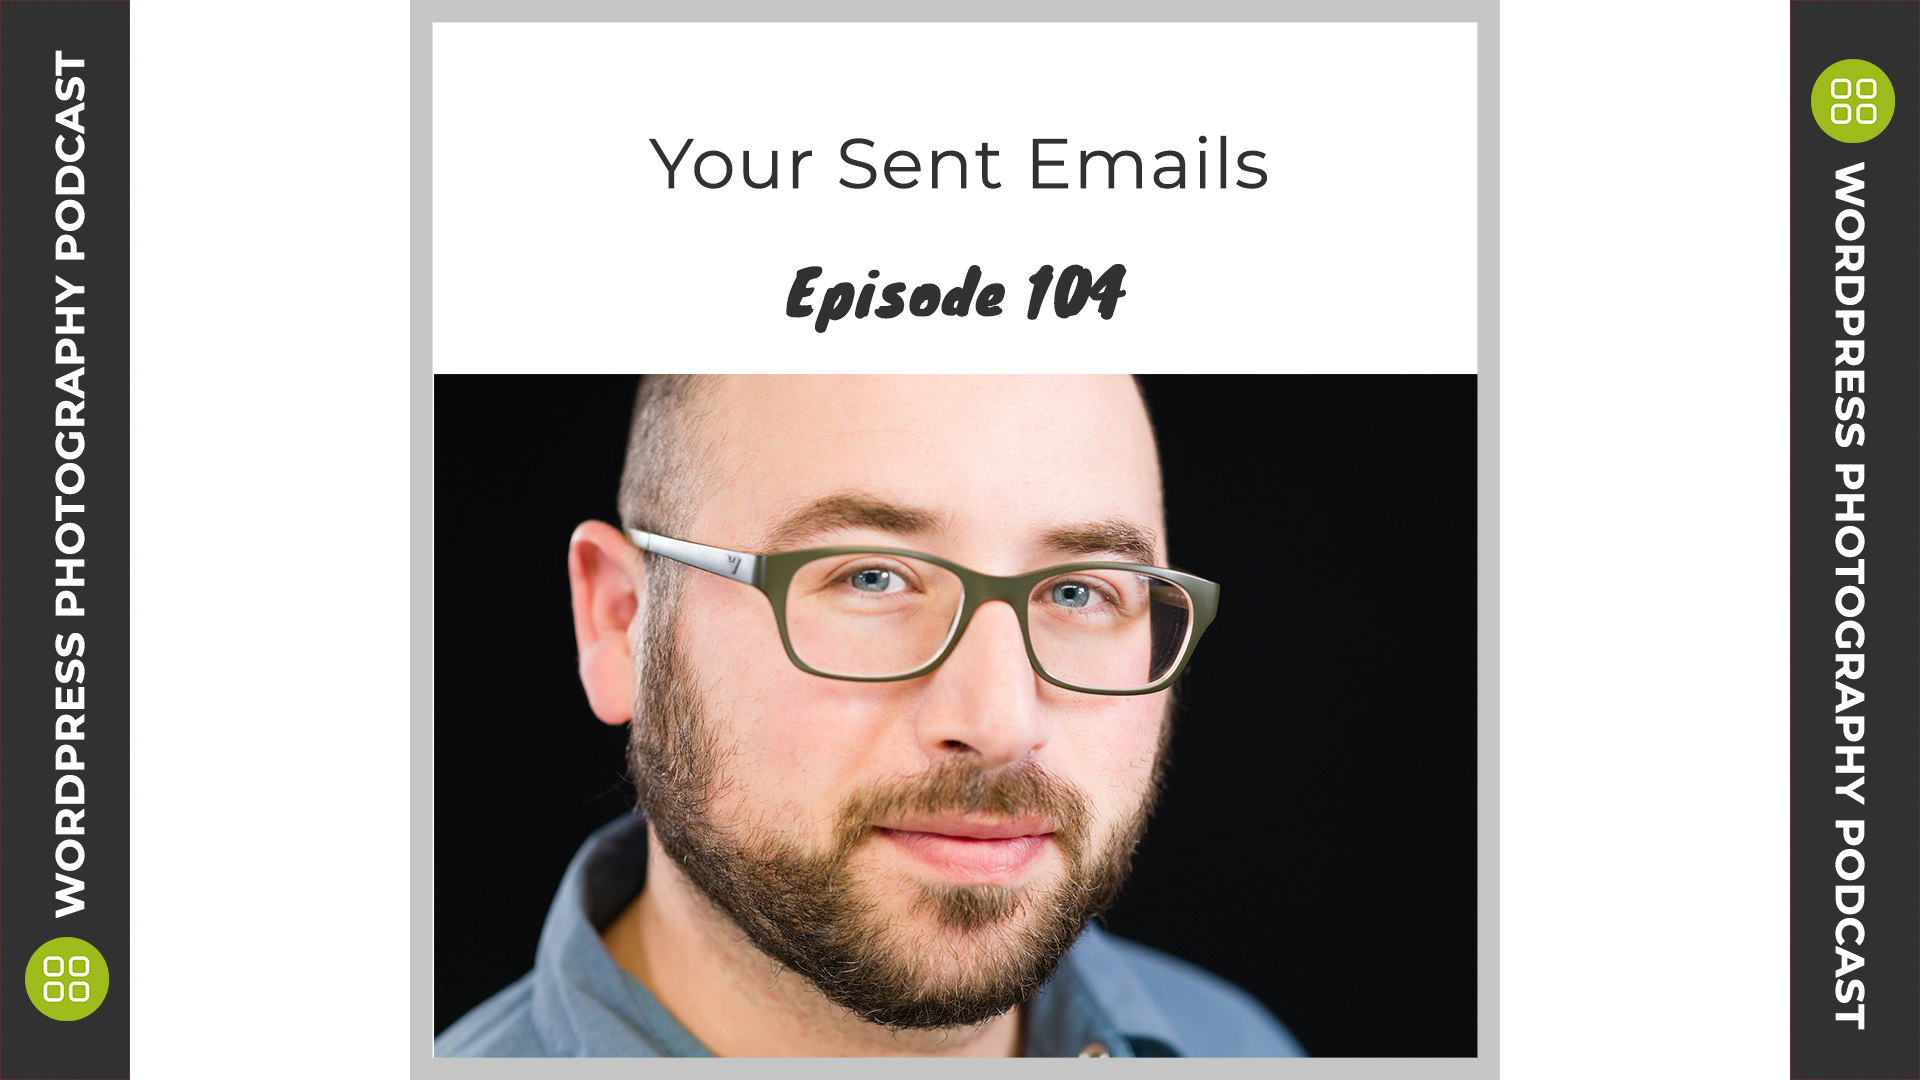 Episode 104 – Your Sent Emails